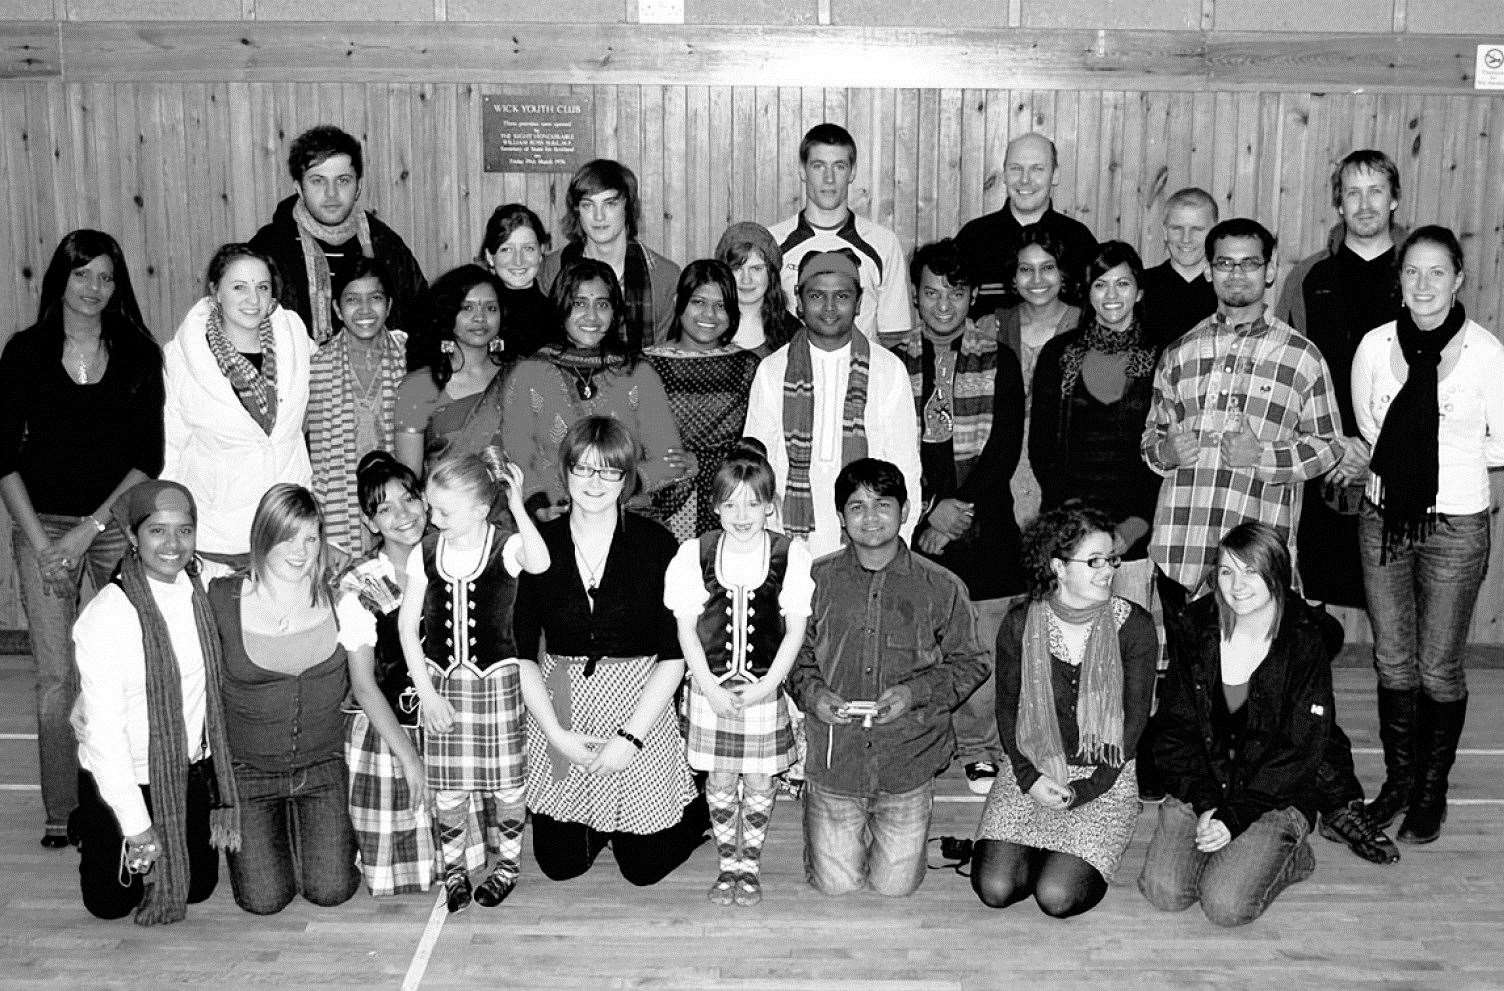 This week in 2008, Wick Youth Club organised a ceilidh for members of a Global Xchange team from the UK and Bangladesh who were staying in the north.